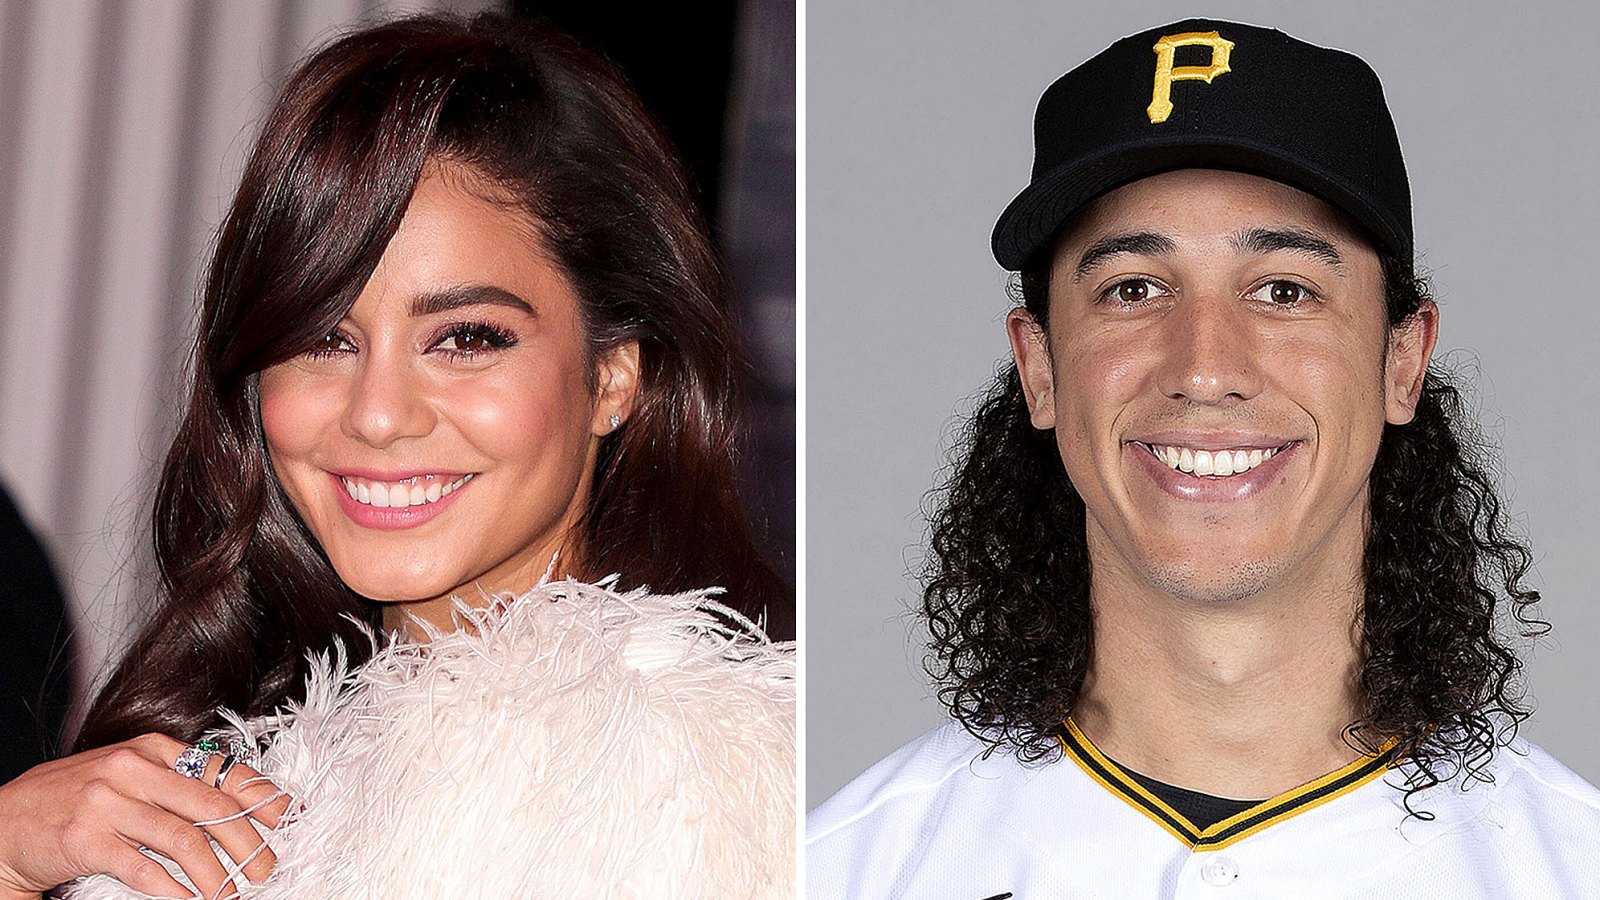 MLB Player Cole Tucker Opens Up About His Relationship with Vanessa Hudgens